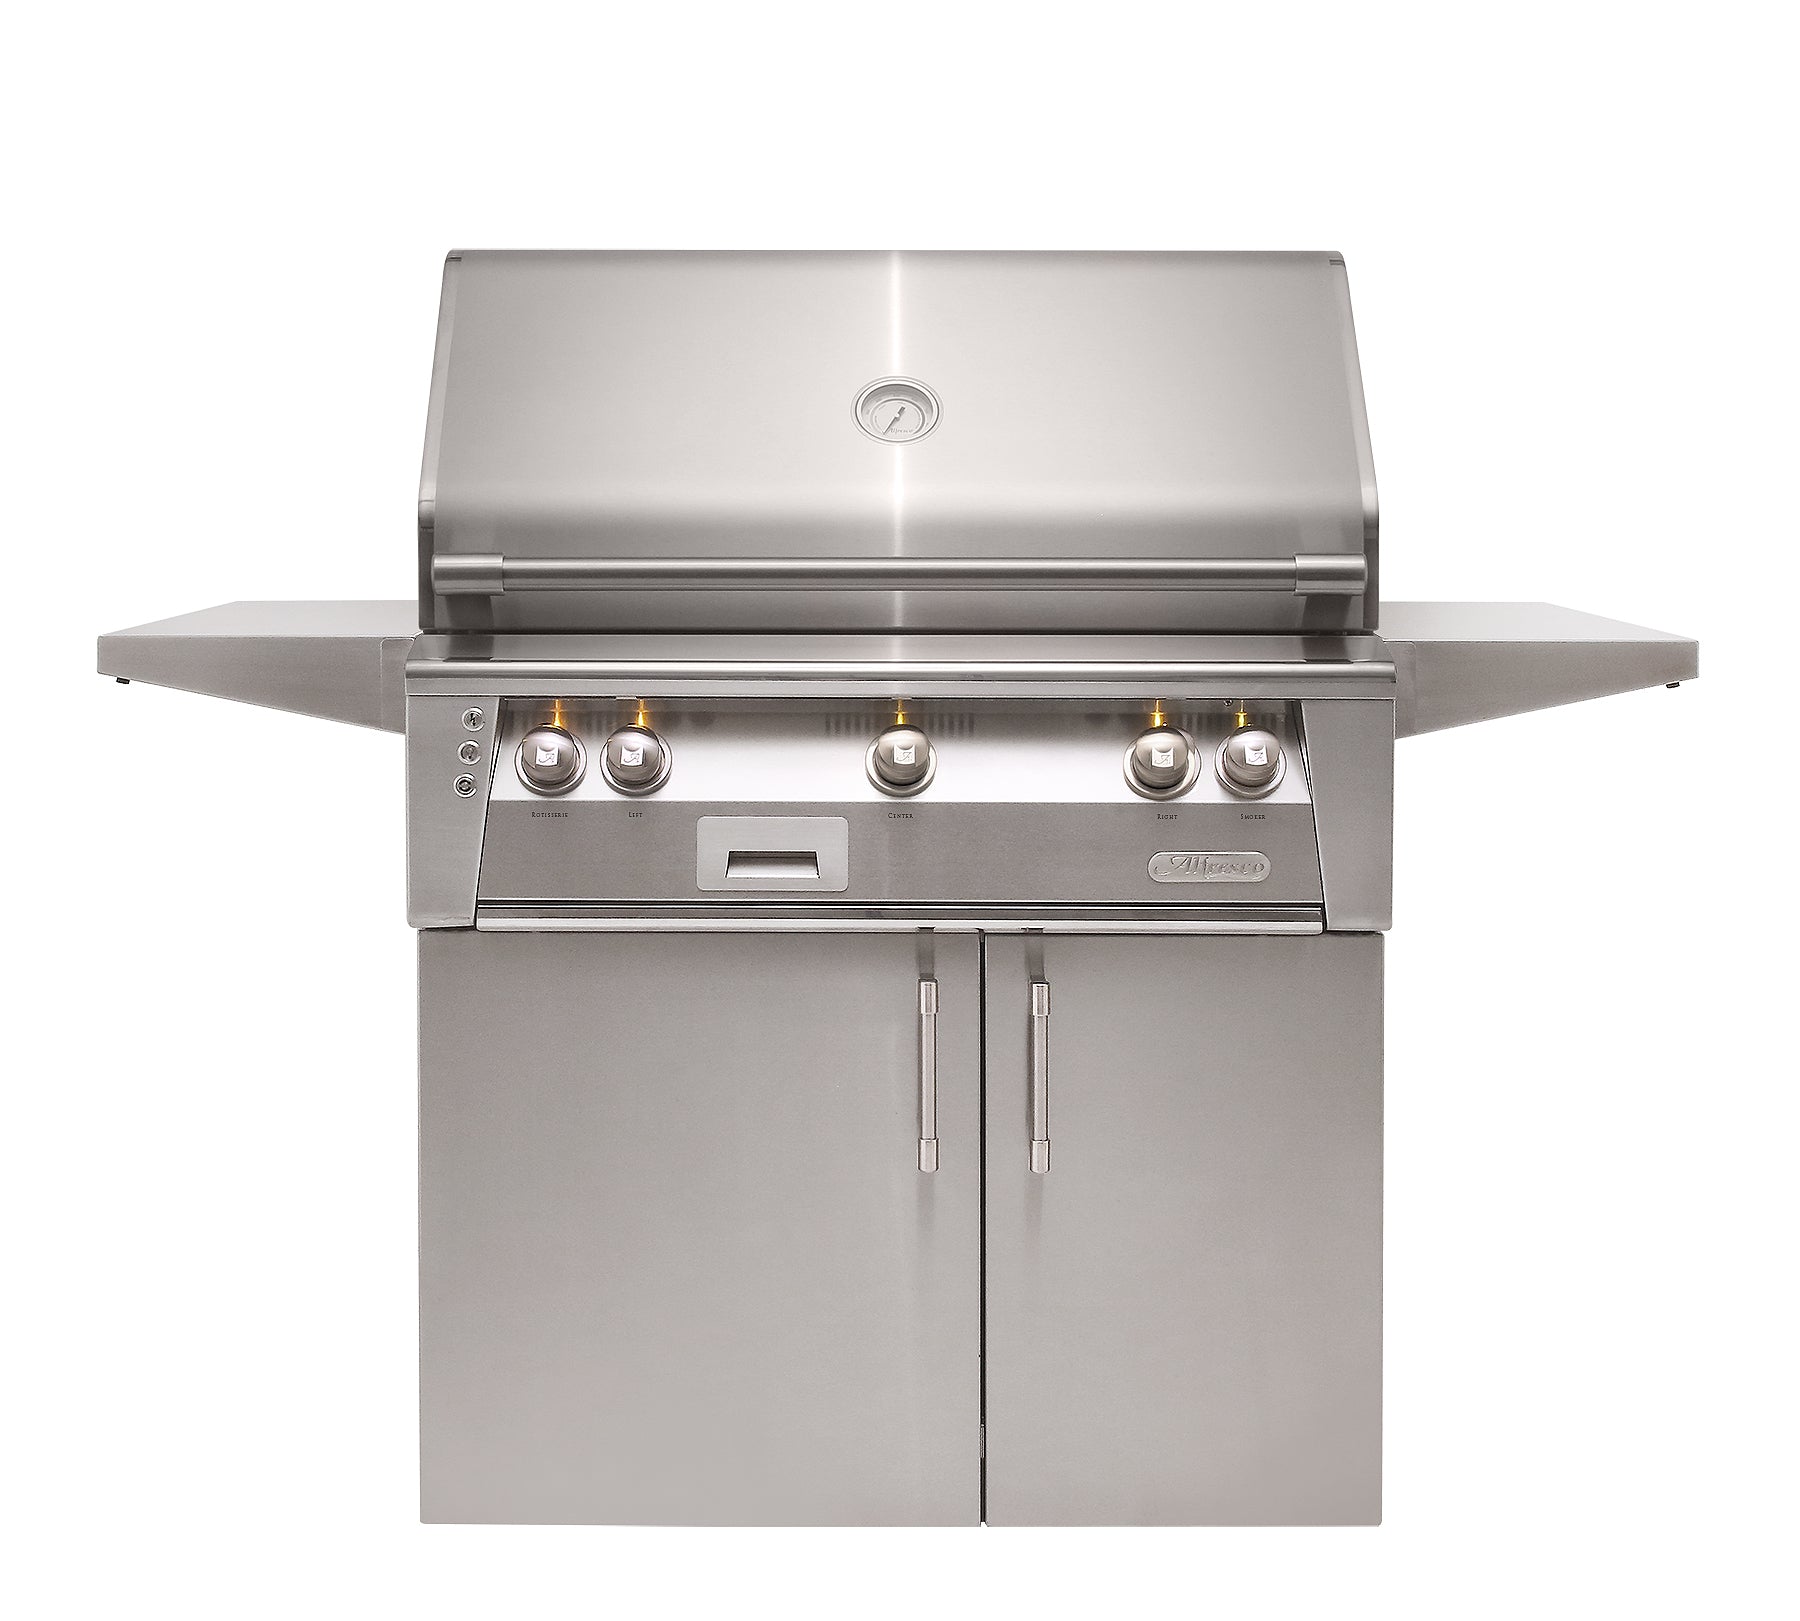 Alfresco - 3 Burner Natural Gas BBQ in Stainless - ALXE-36SZC